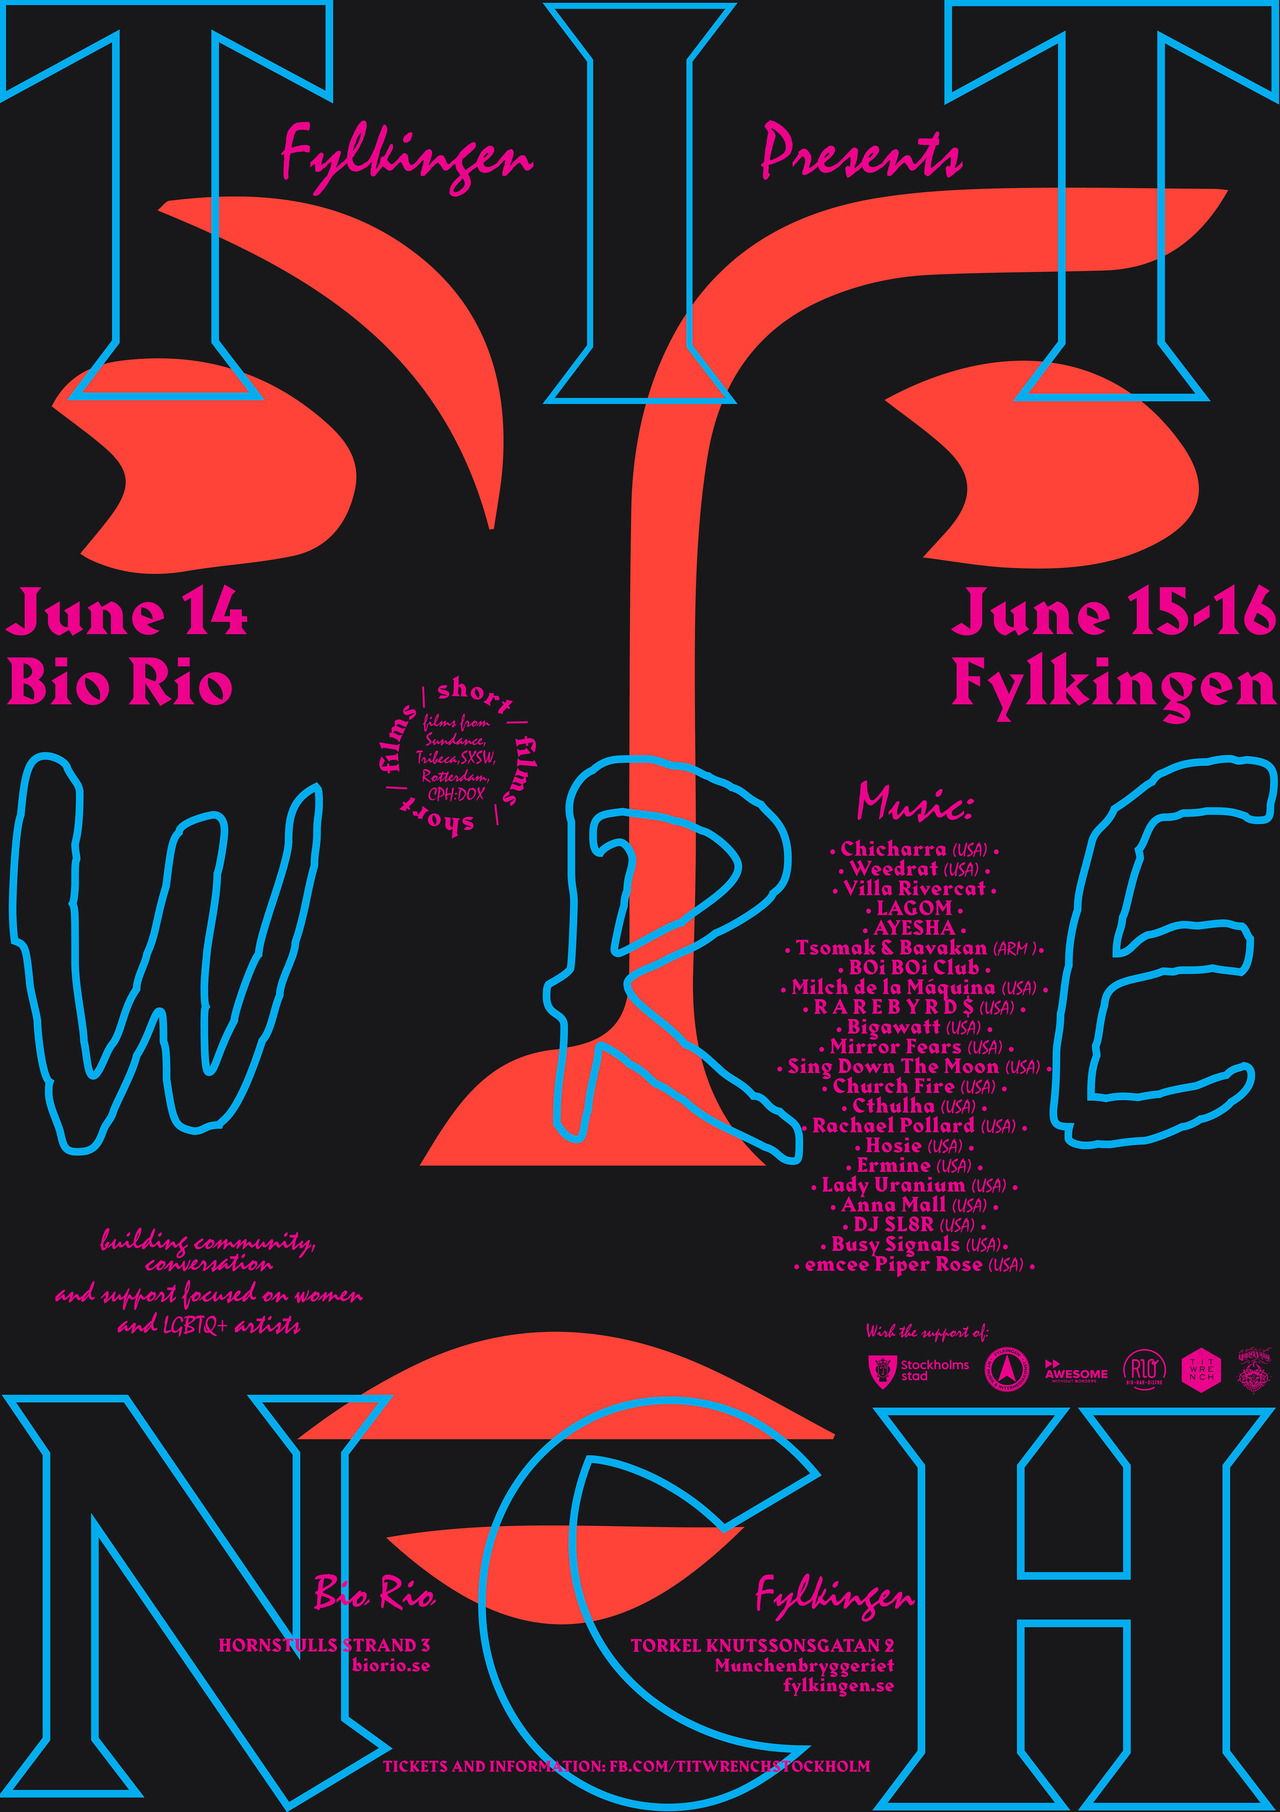 Join us for @titwrenchstockholm Festivalen on June 15-16 at Fylkingen, in Stockholm, Sweden!
Kickoff party on June 14th with a very special film festival at Bio Rio!
experimental // punk // lo-fi // folk // psychedelic // electronic //heavy rock //...